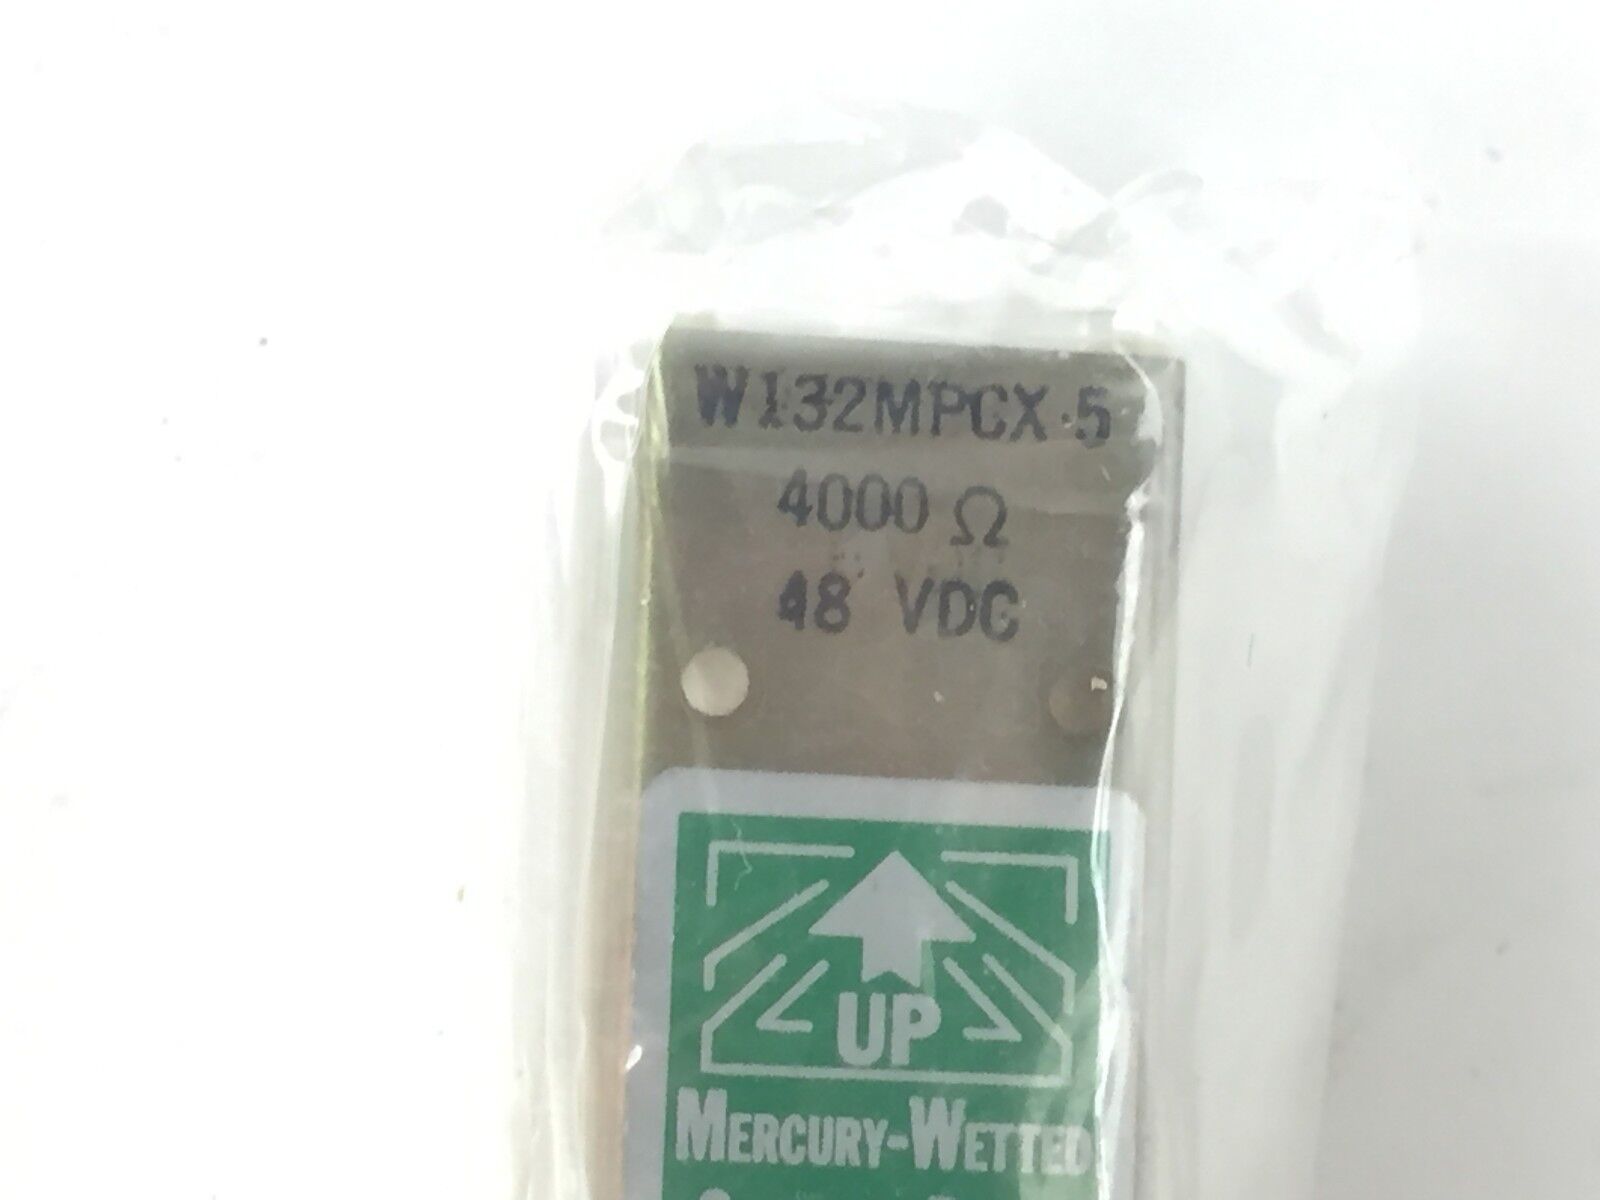 Magnecraft W132MPCX-5 400 Ohm 48VDC Contact Relay Lot of 2